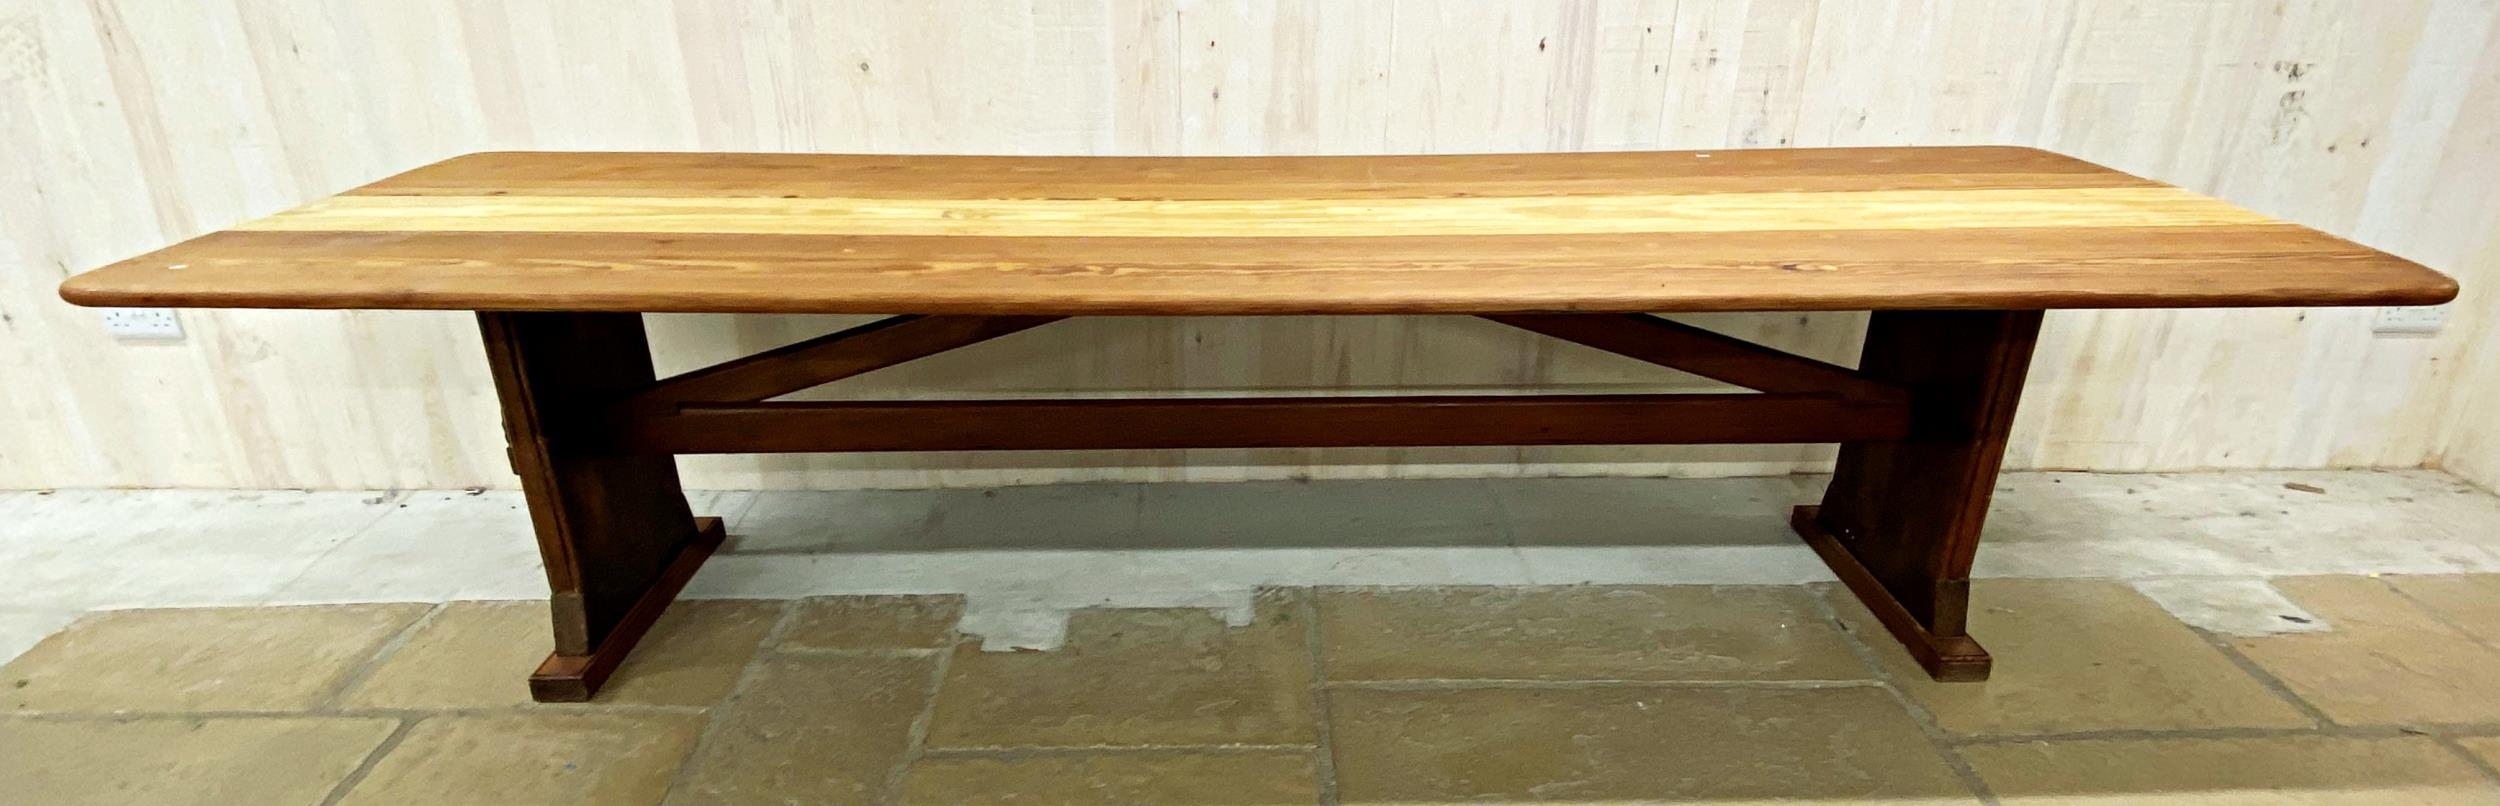 Good Arts and Crafts type pitch pine refectory table with arched stretcher, H 74cm x W 302cm x D - Image 5 of 8